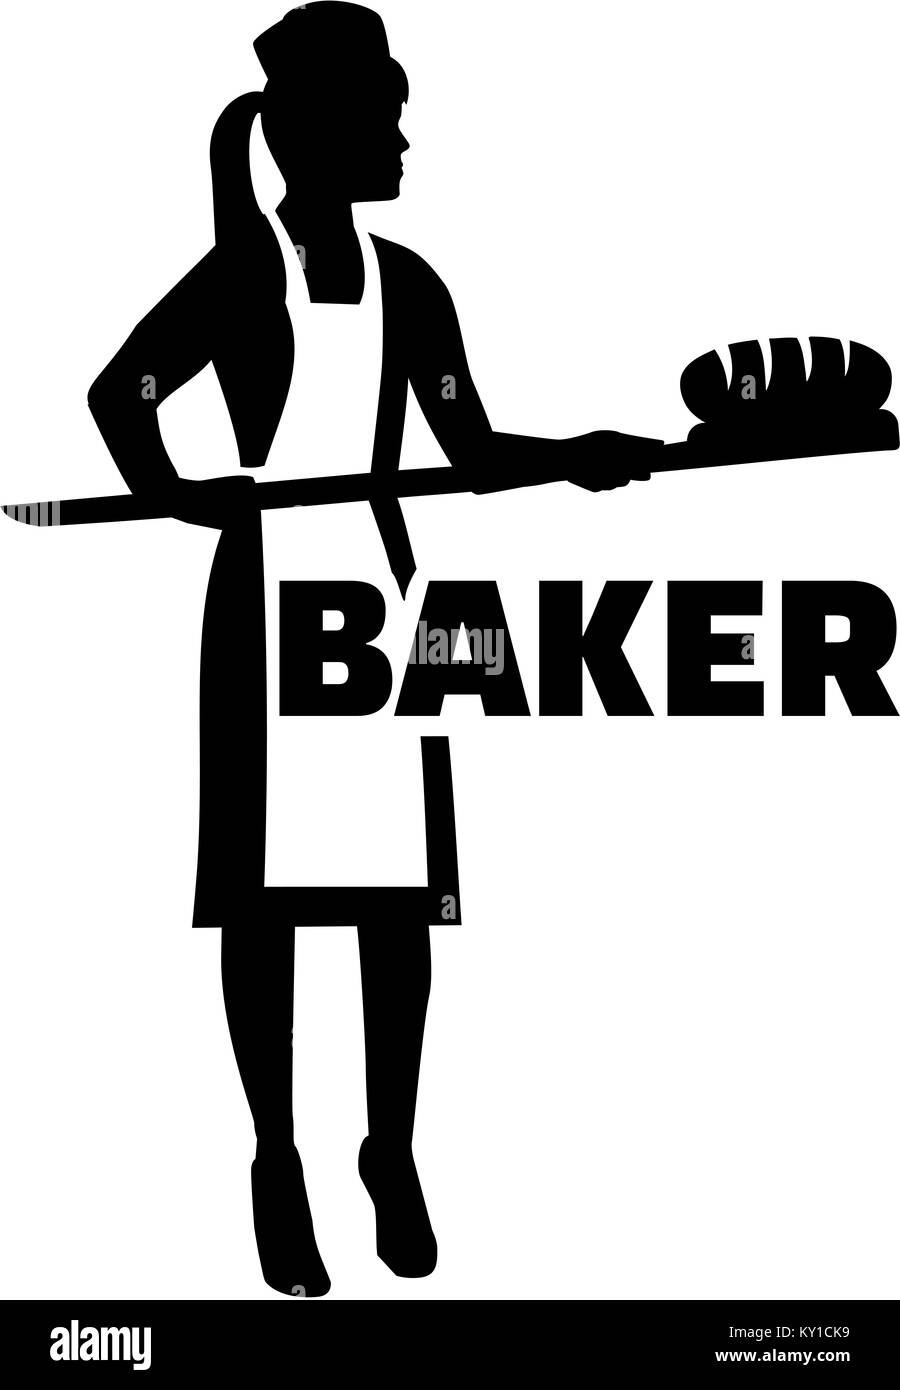 Female baker silhouette with job title Stock Photo